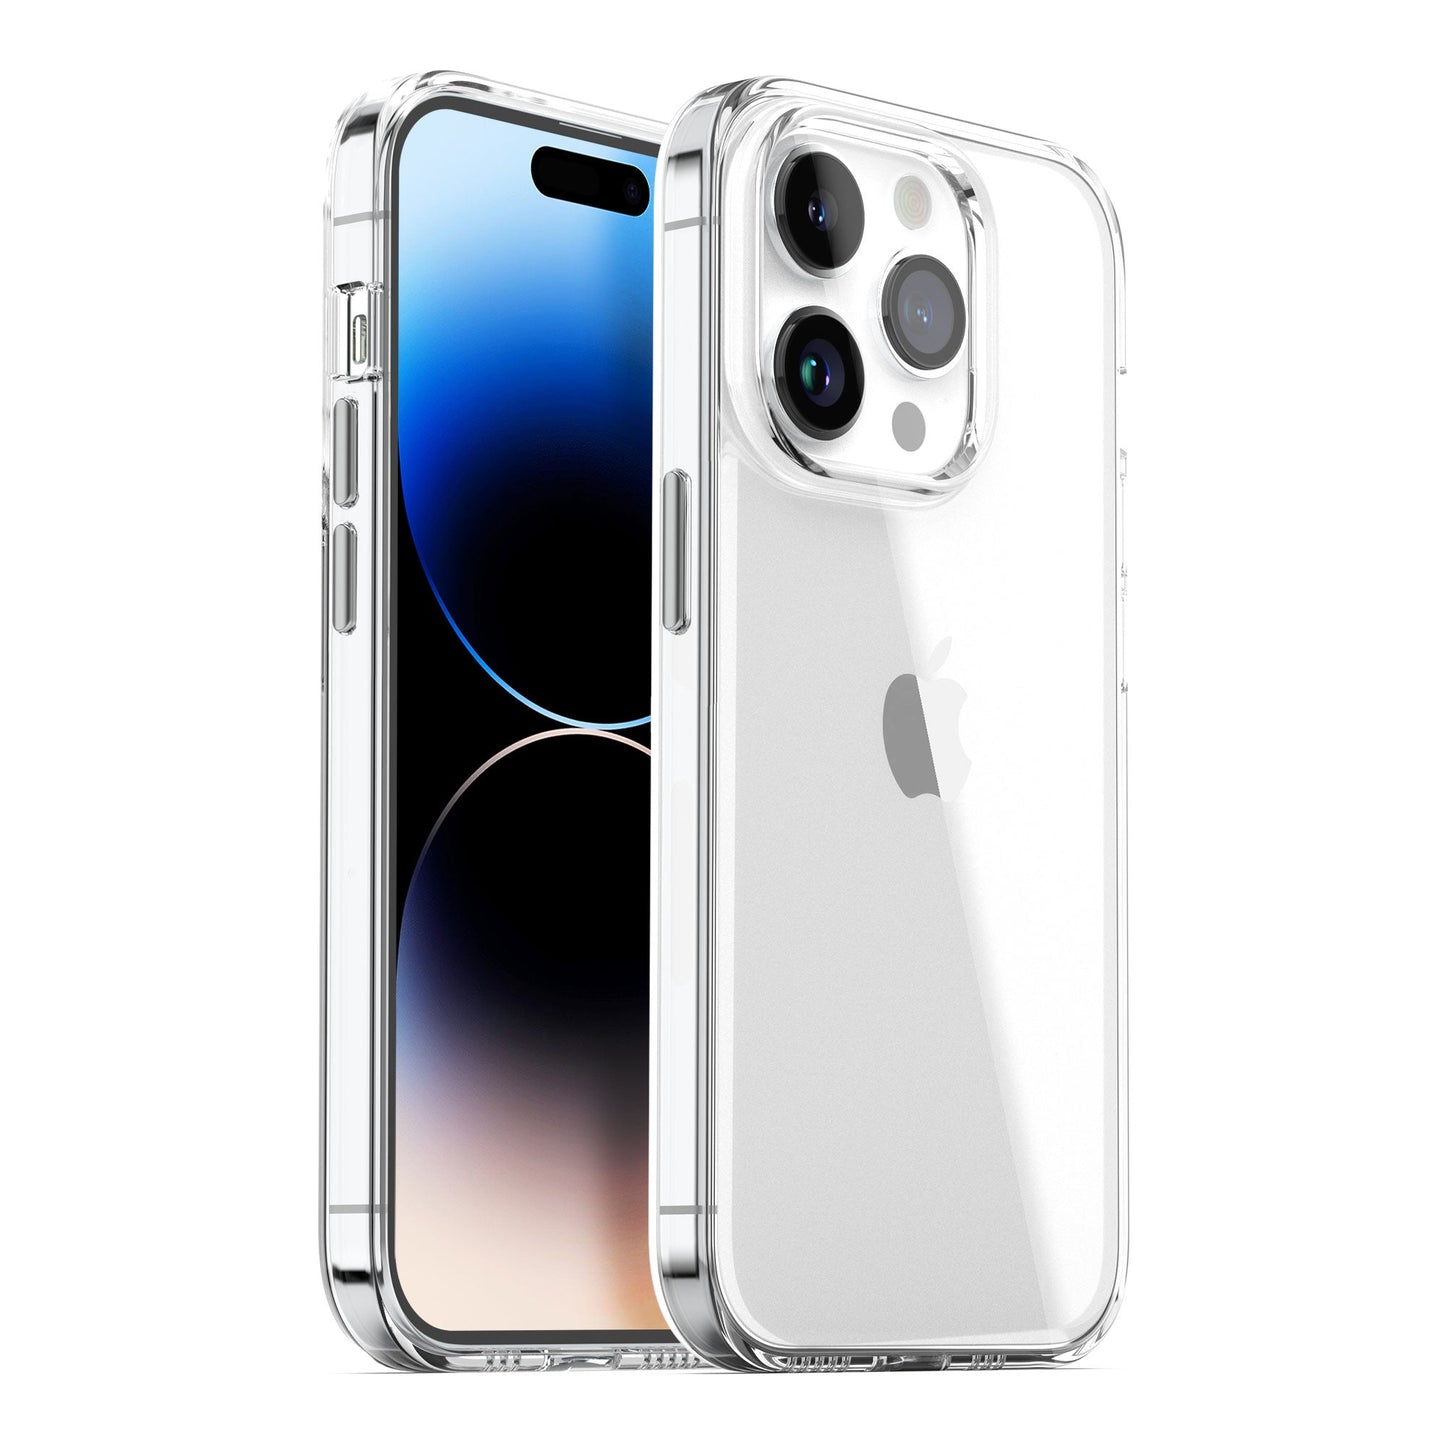 MR PROTECT iPhone 13 Pro CLEAR Case